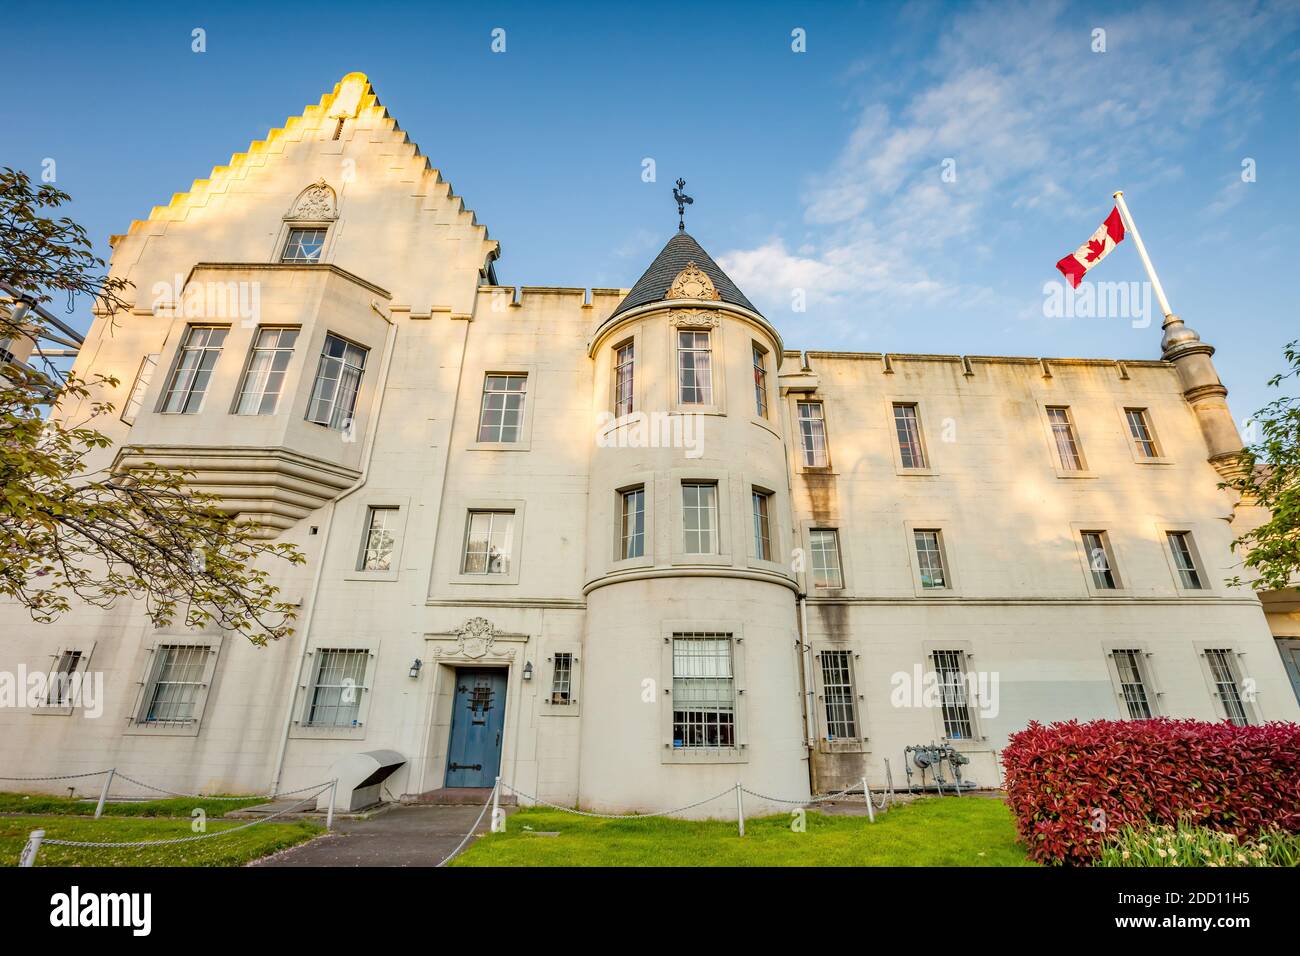 Seaforth Armoury Museum in Vancouver, BC, Canada Stock Photo